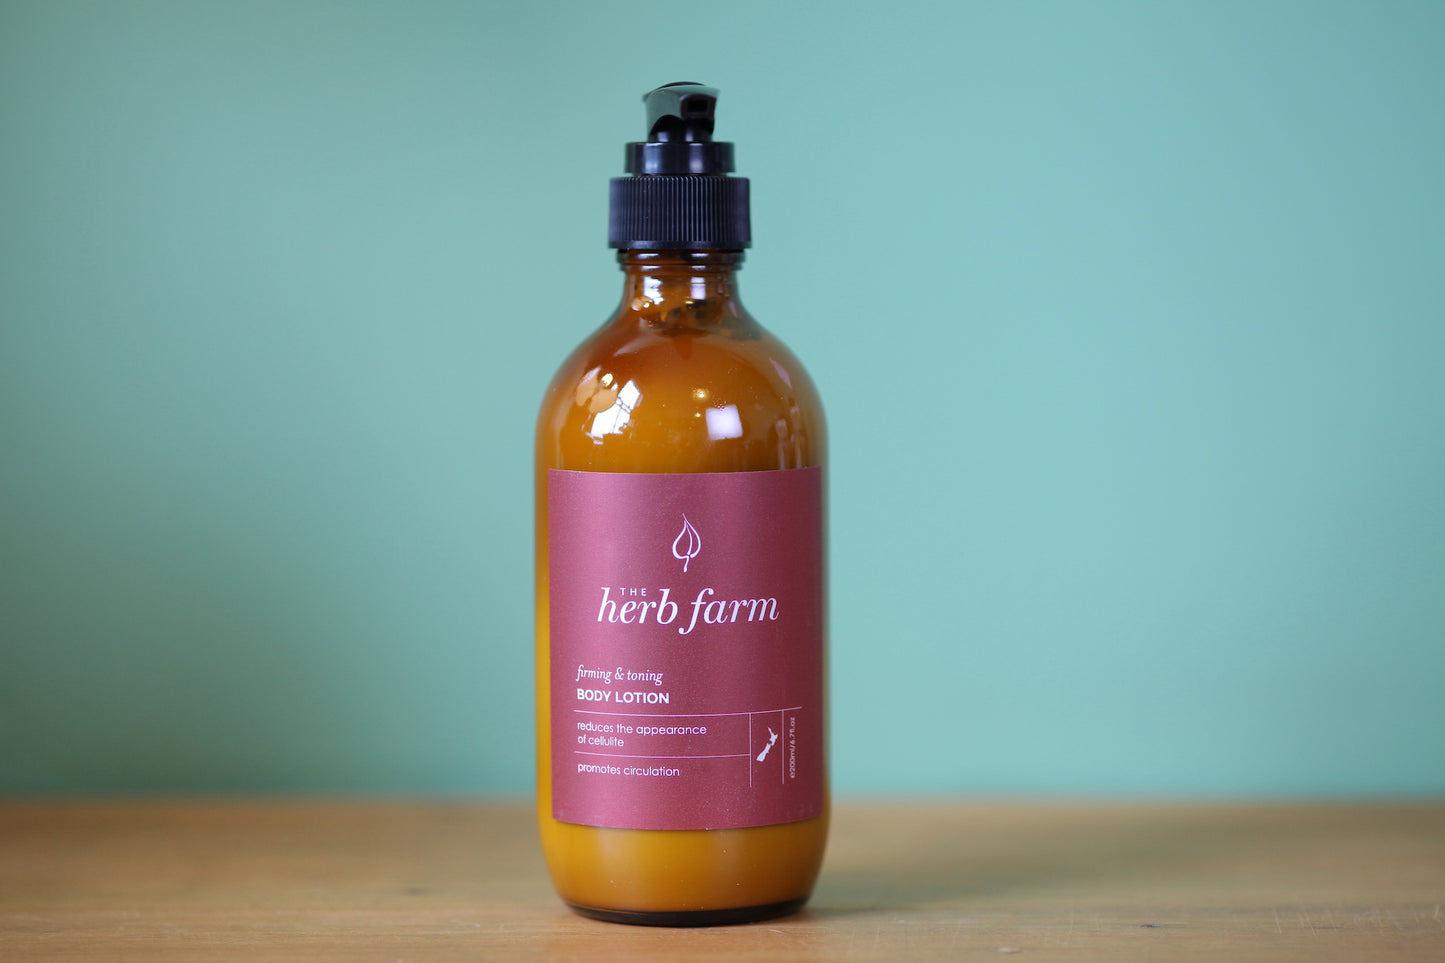 The Herb Farm Firming and Toning Body Lotion